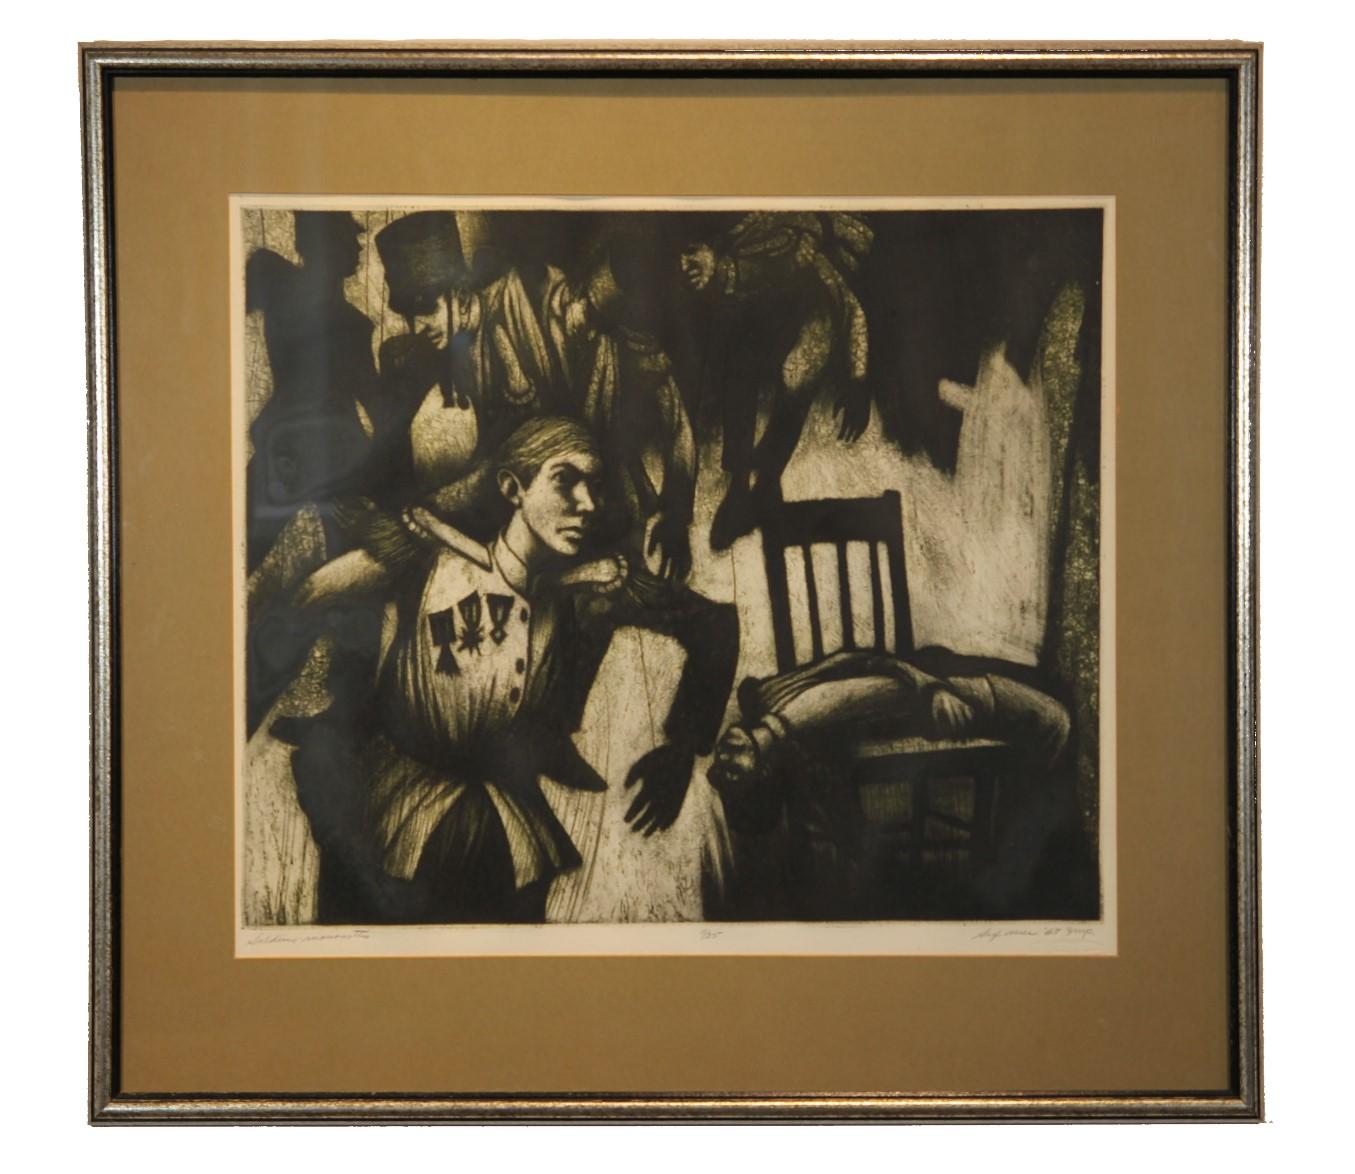 Donald Sexauer Abstract Print – Surrealistische figurative Lithographie „Soldaten Marionettes“